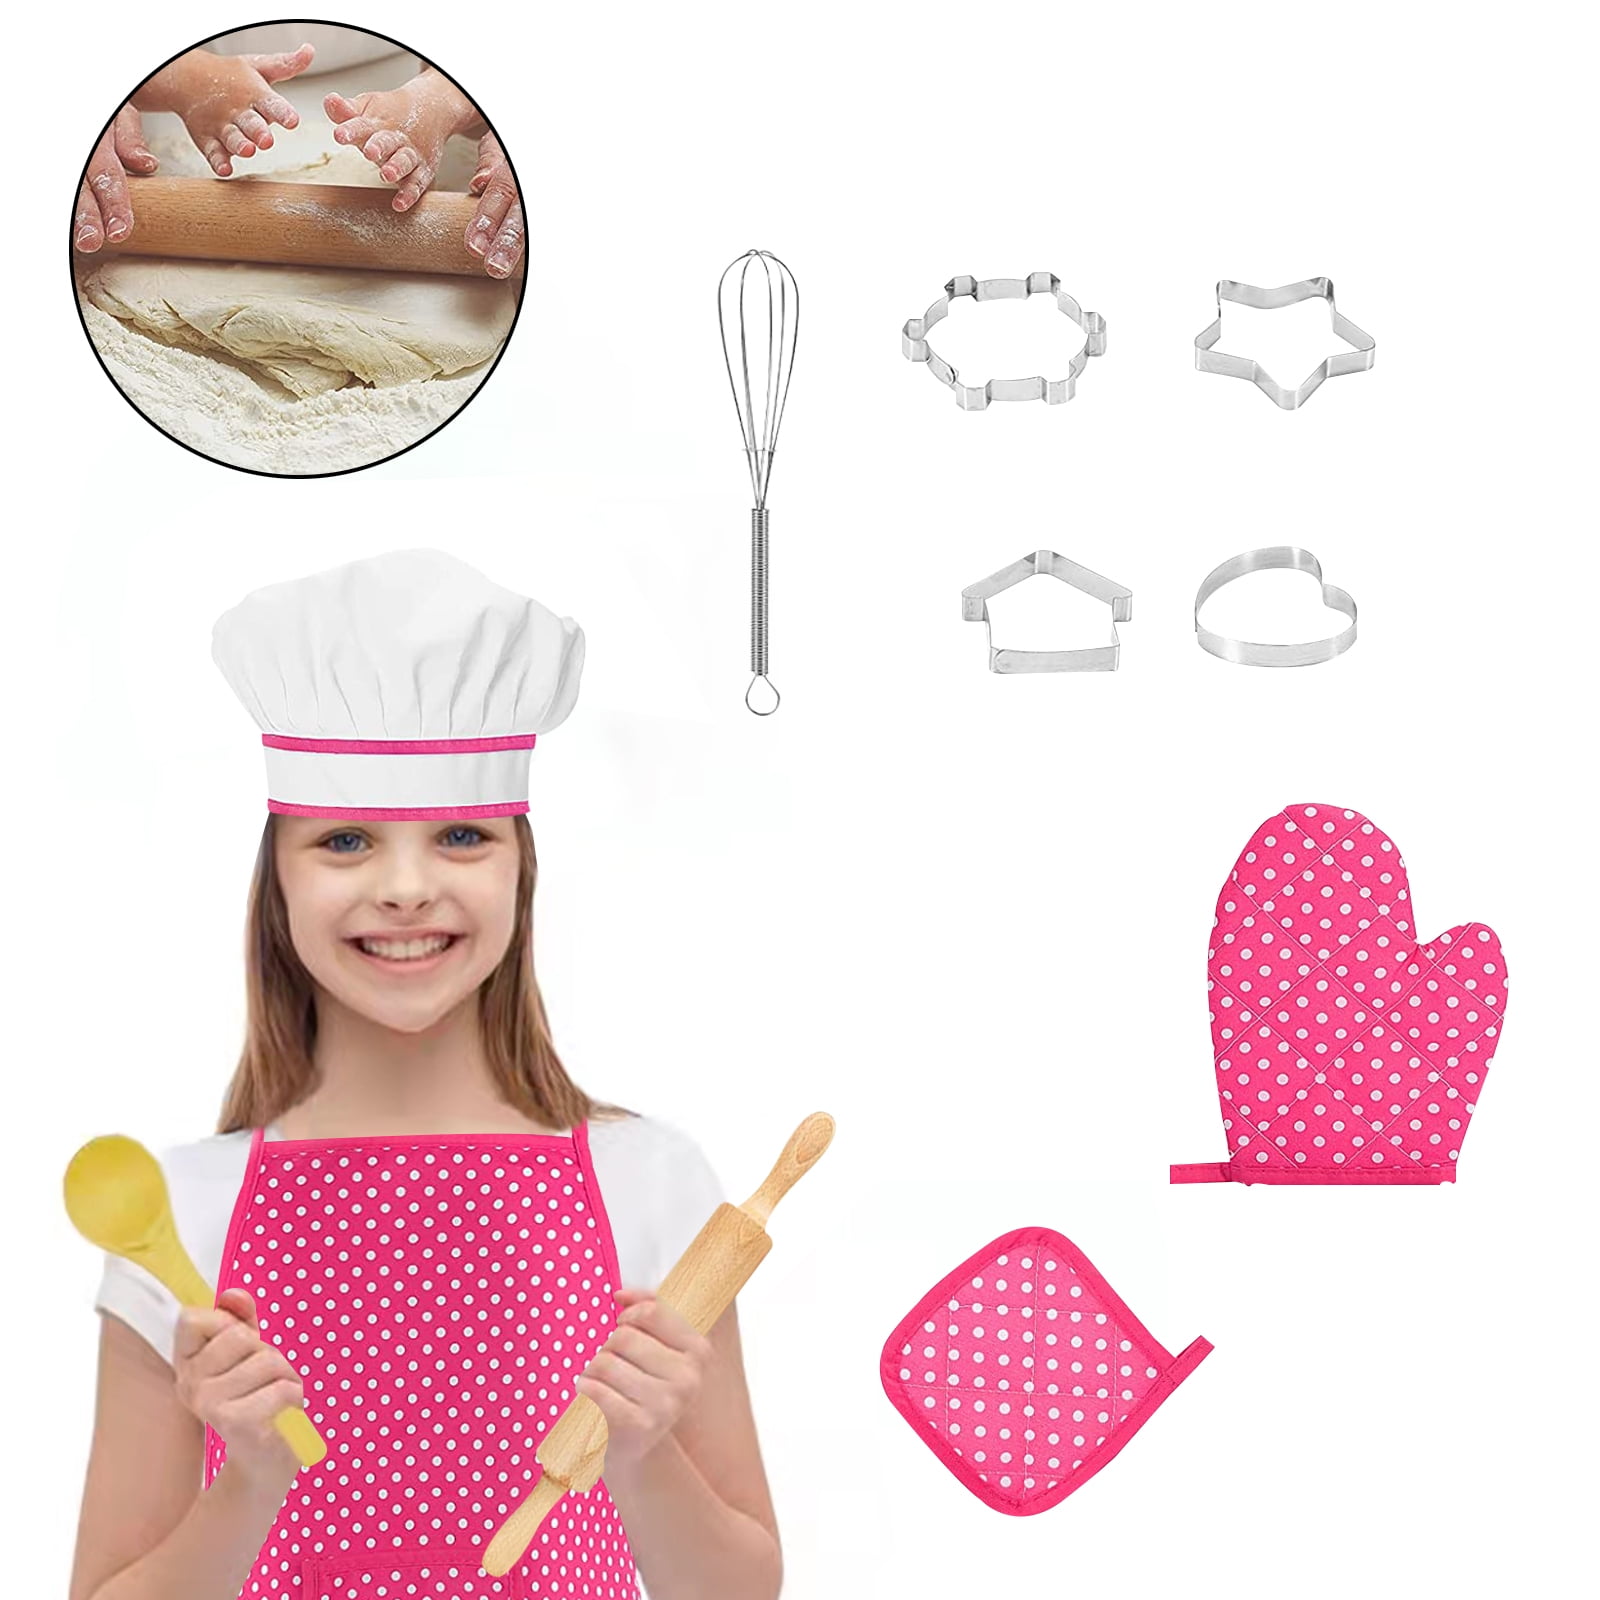 PixieCrush The Little Baker Kit Mini Baking Set for Kids DIY Cooking Kit Includes Chef Hat and Apron for Children's Kitchen Role Play Pink Kids Baking Set for Aspiring Chef 